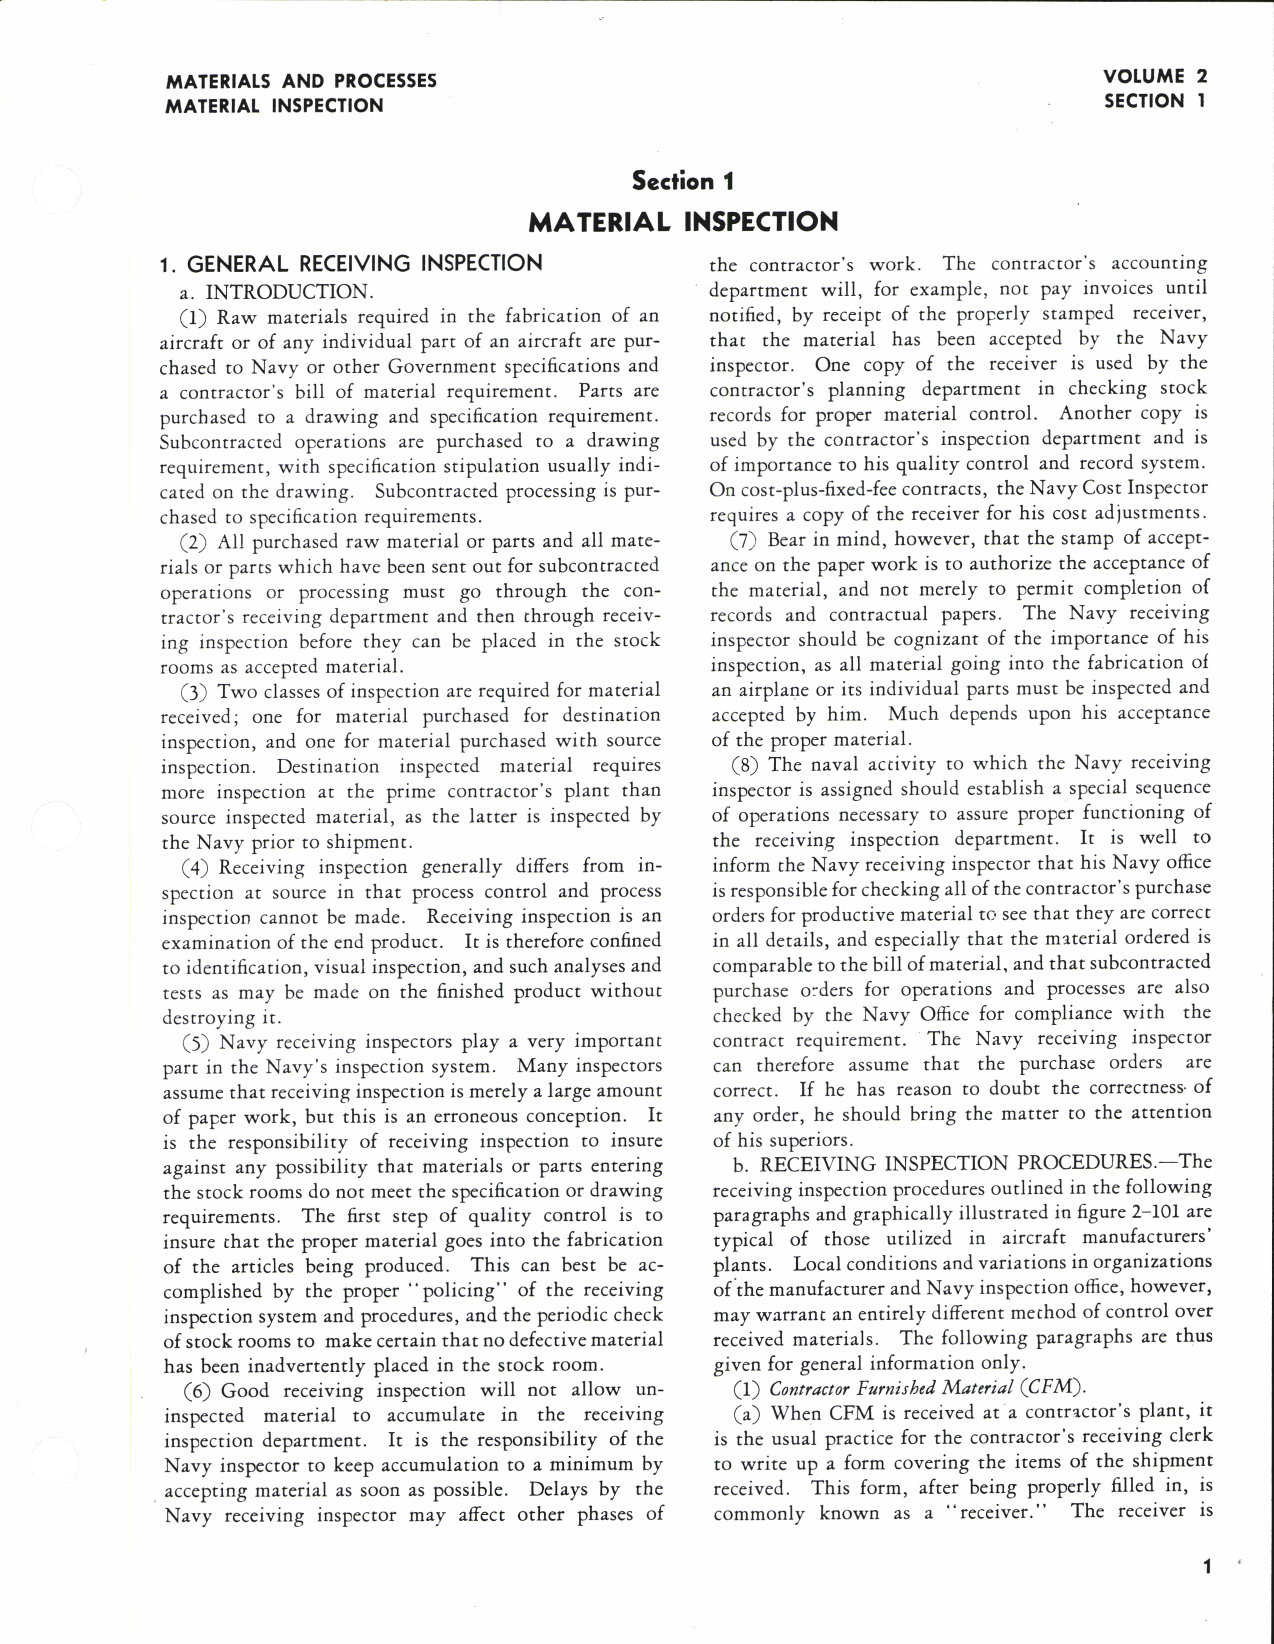 Sample page 7 from AirCorps Library document: Aeronautical Technical Inspection Manual - Material and Process Inspection